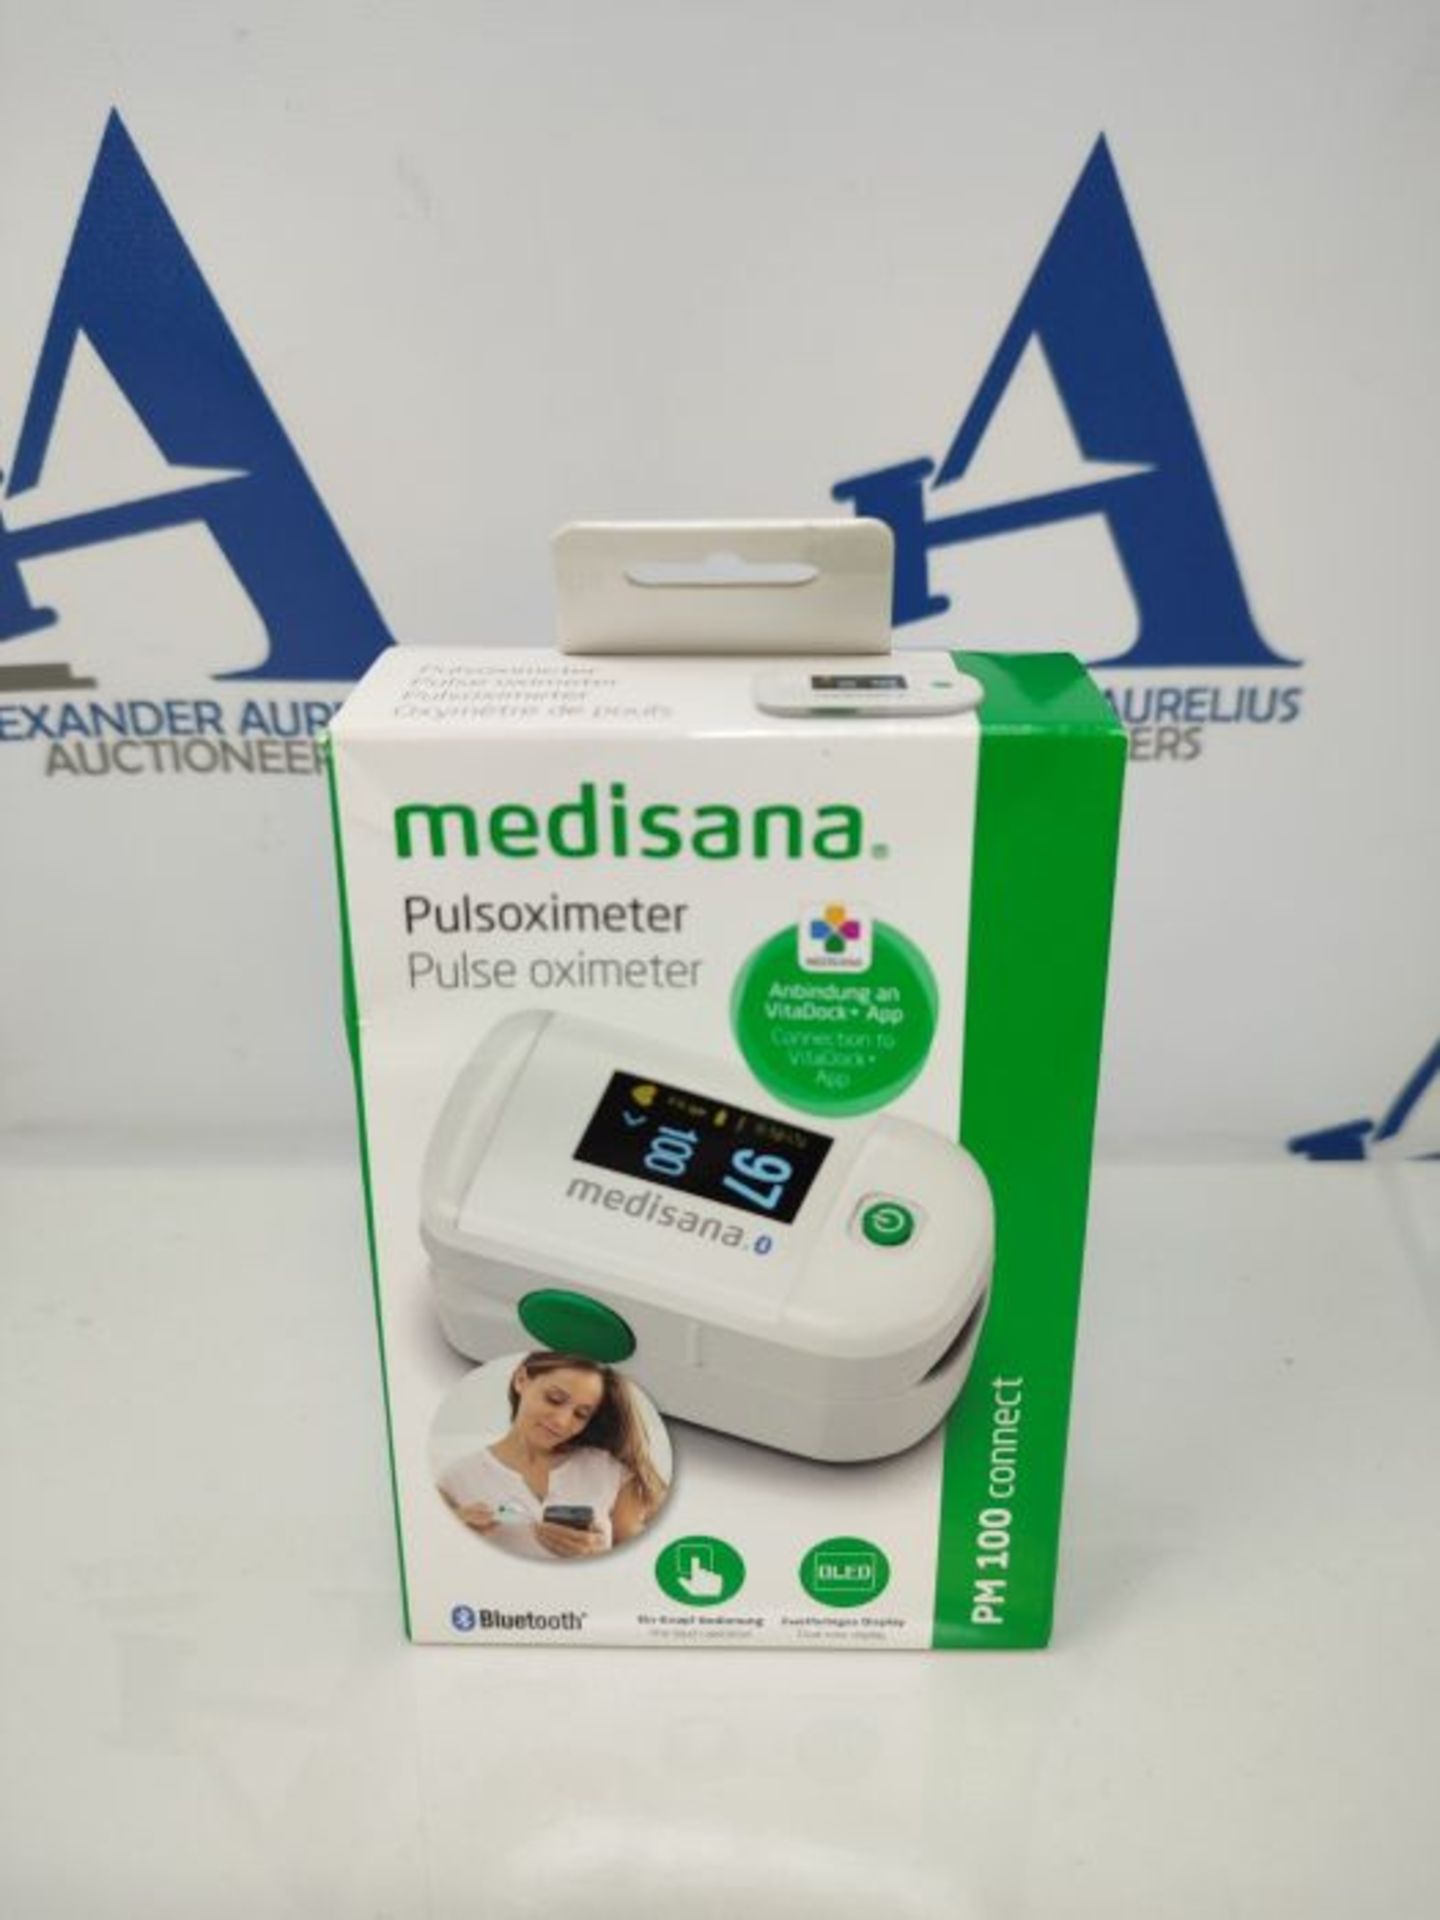 Medisana PM 100 Connect Pulse oximeter, 500 g, 79456 - Image 2 of 3